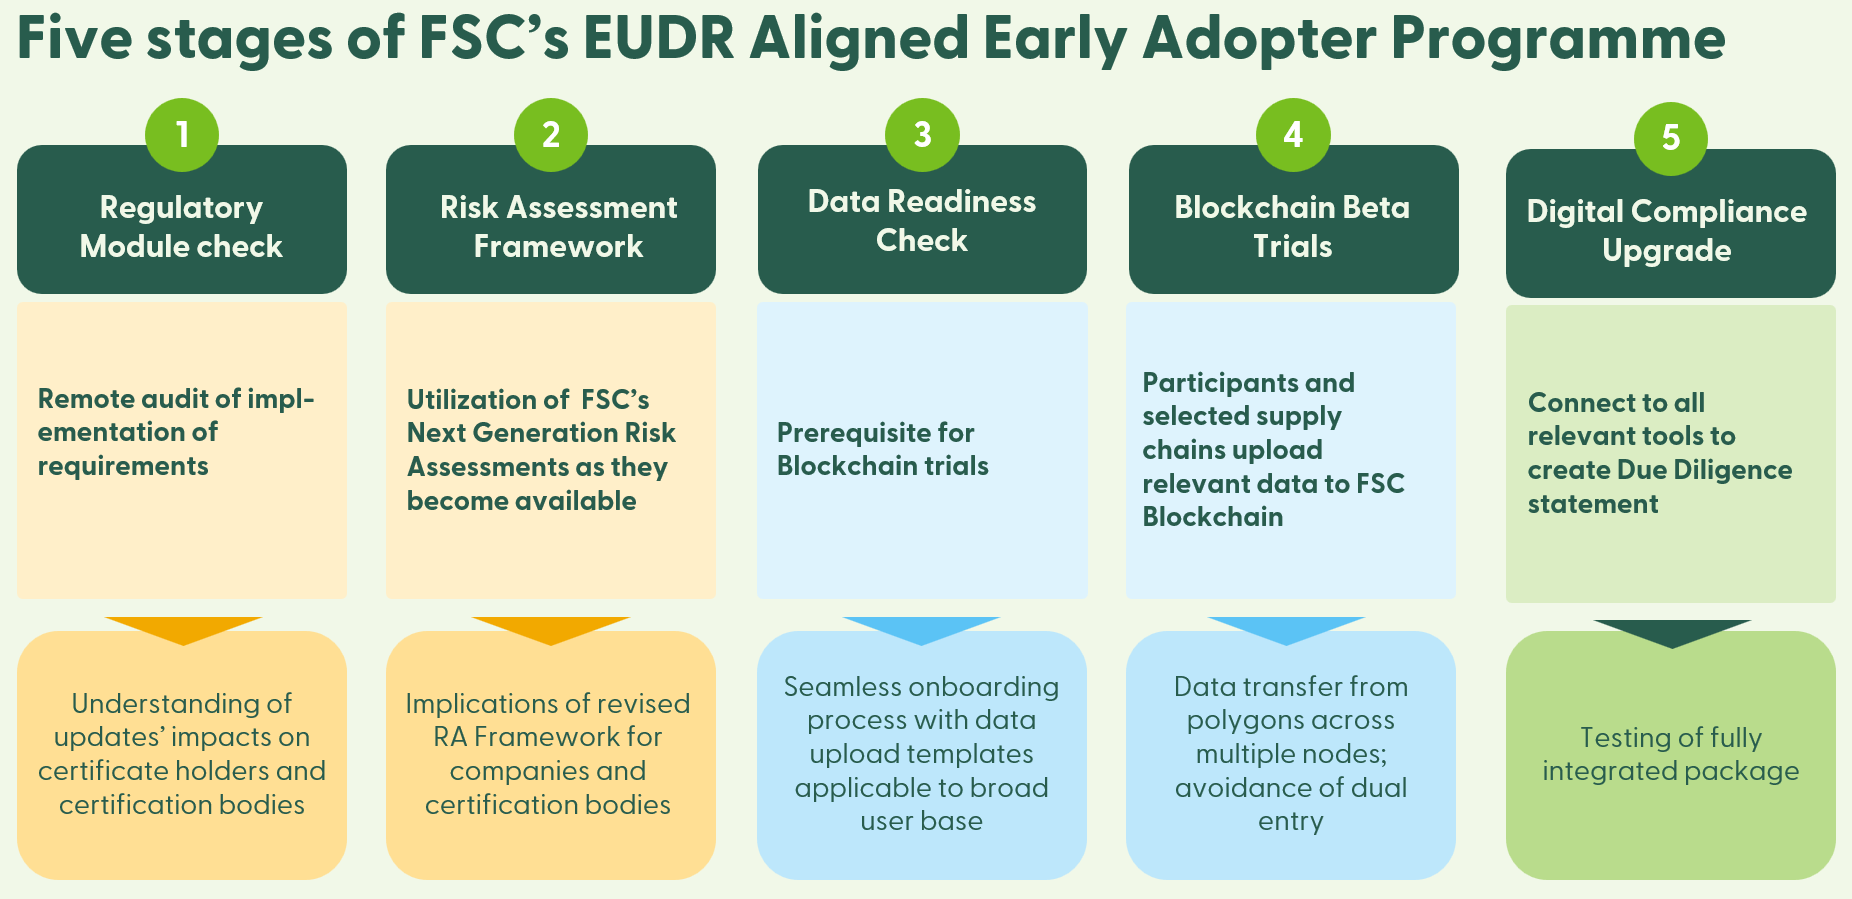 EUDR Early Adopter